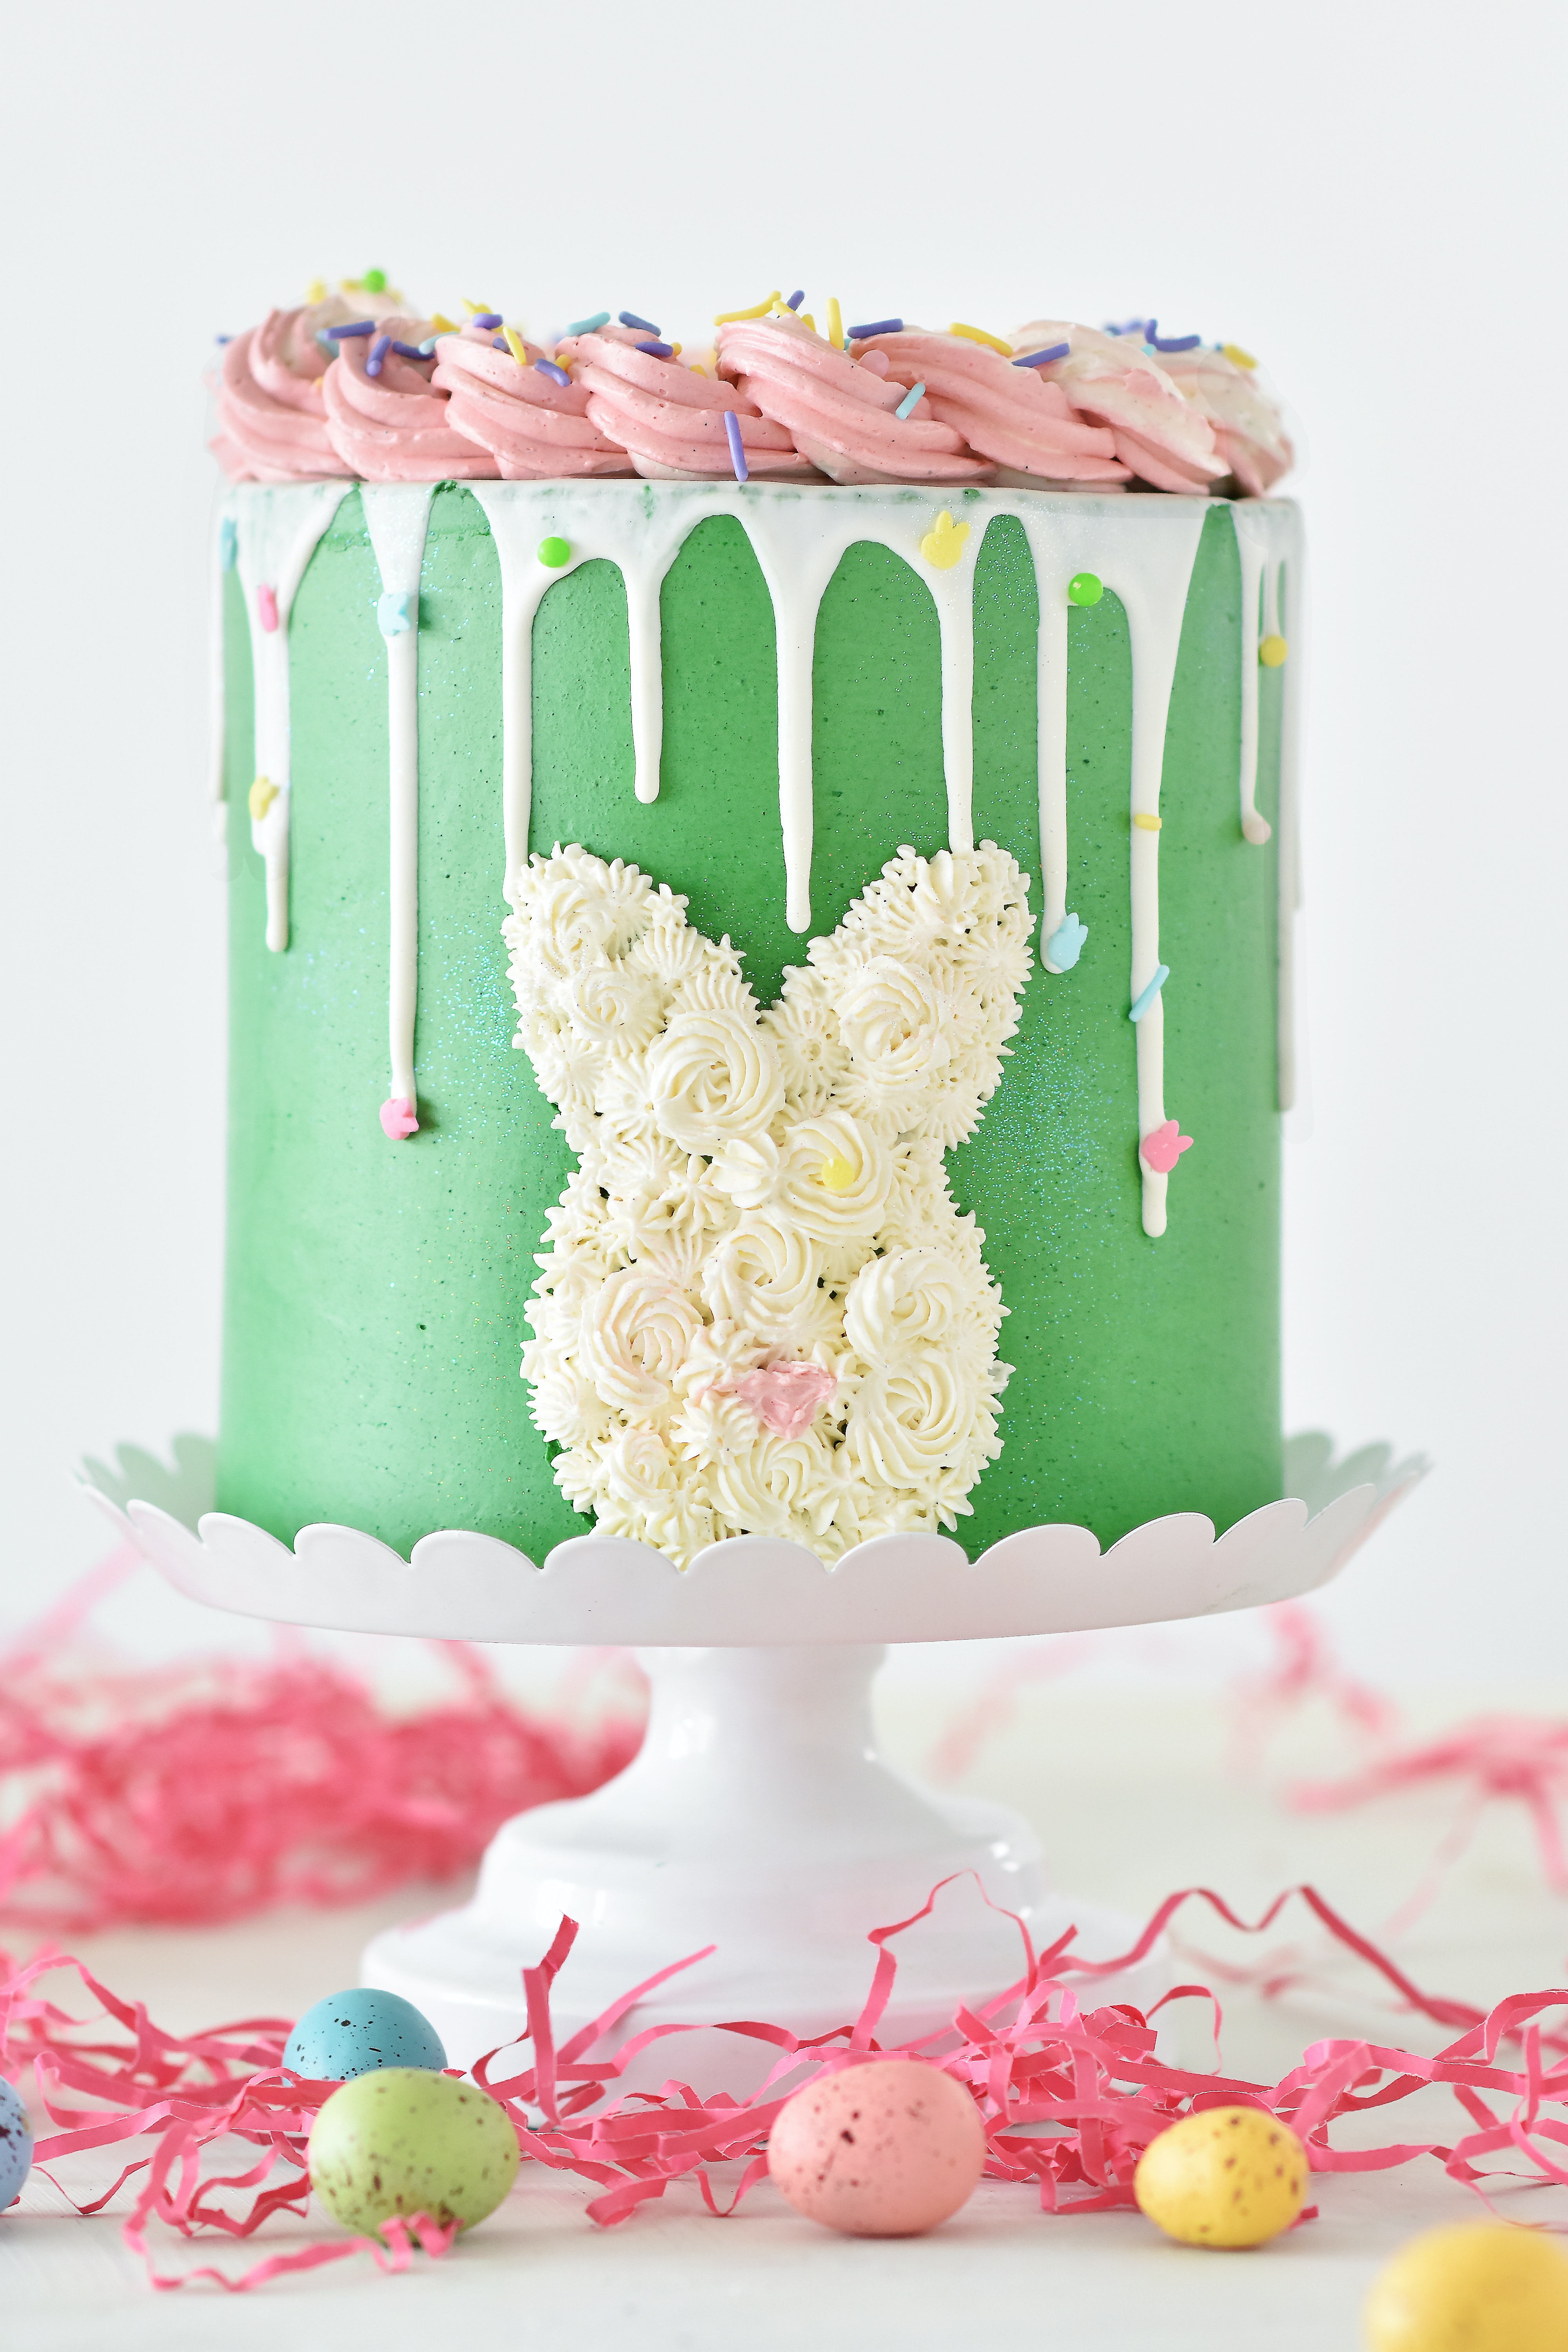 easter, food, holiday, cake Full HD